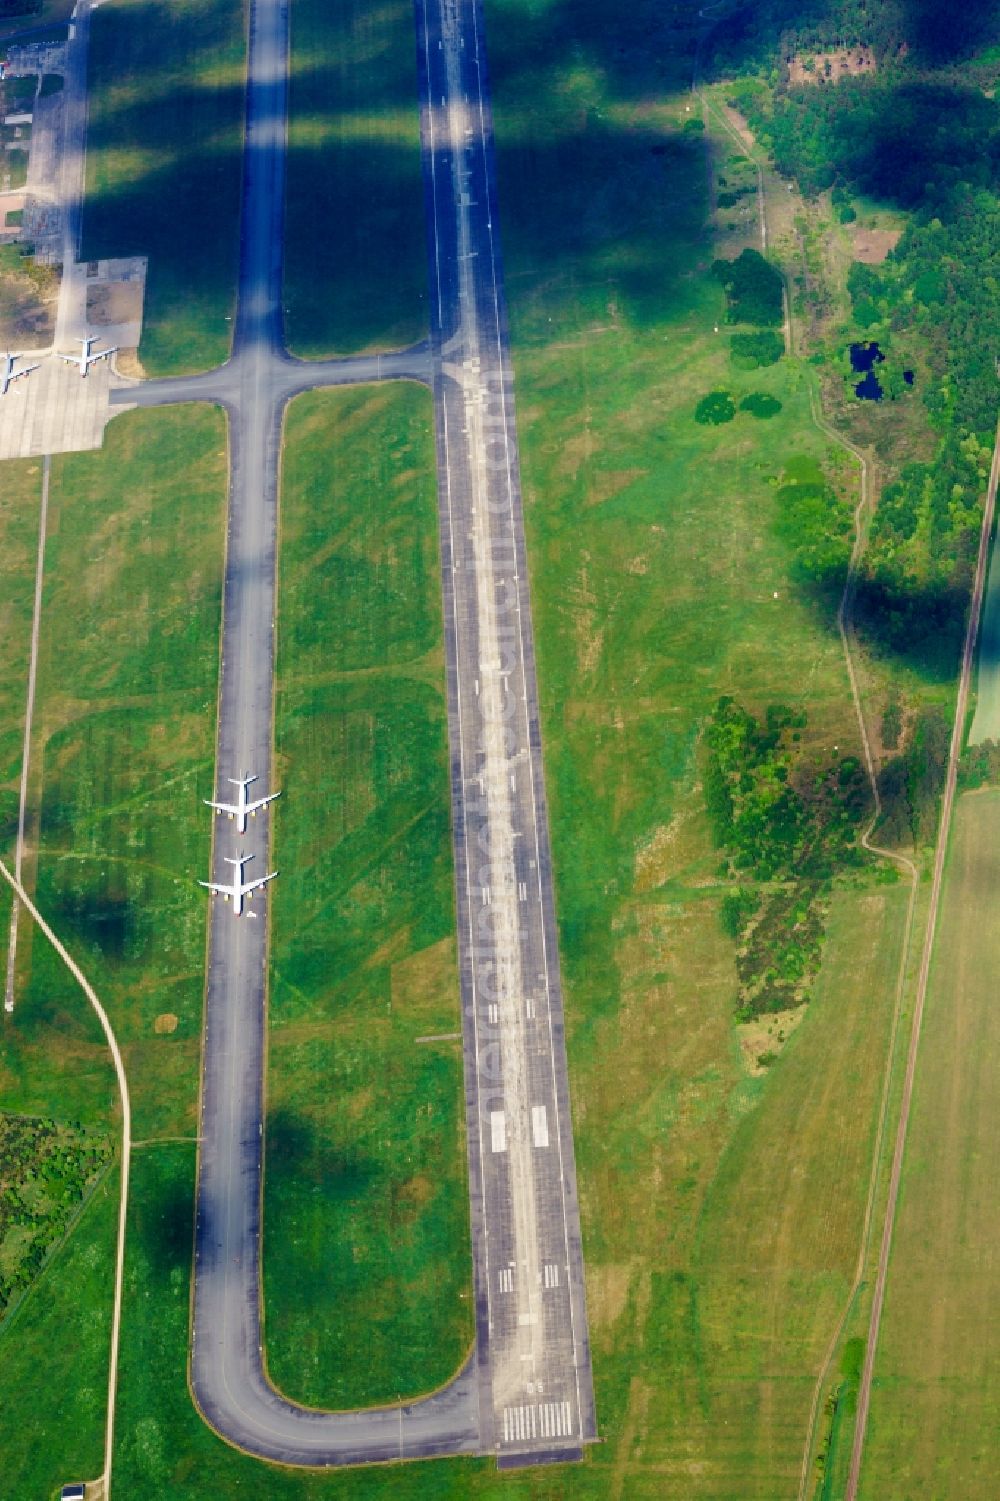 Parchim from the bird's eye view: Deposed Airbus A340 passenger aircraft on the taxiway of the airport in Parchim in the state of Mecklenburg-Vorpommern, Germany